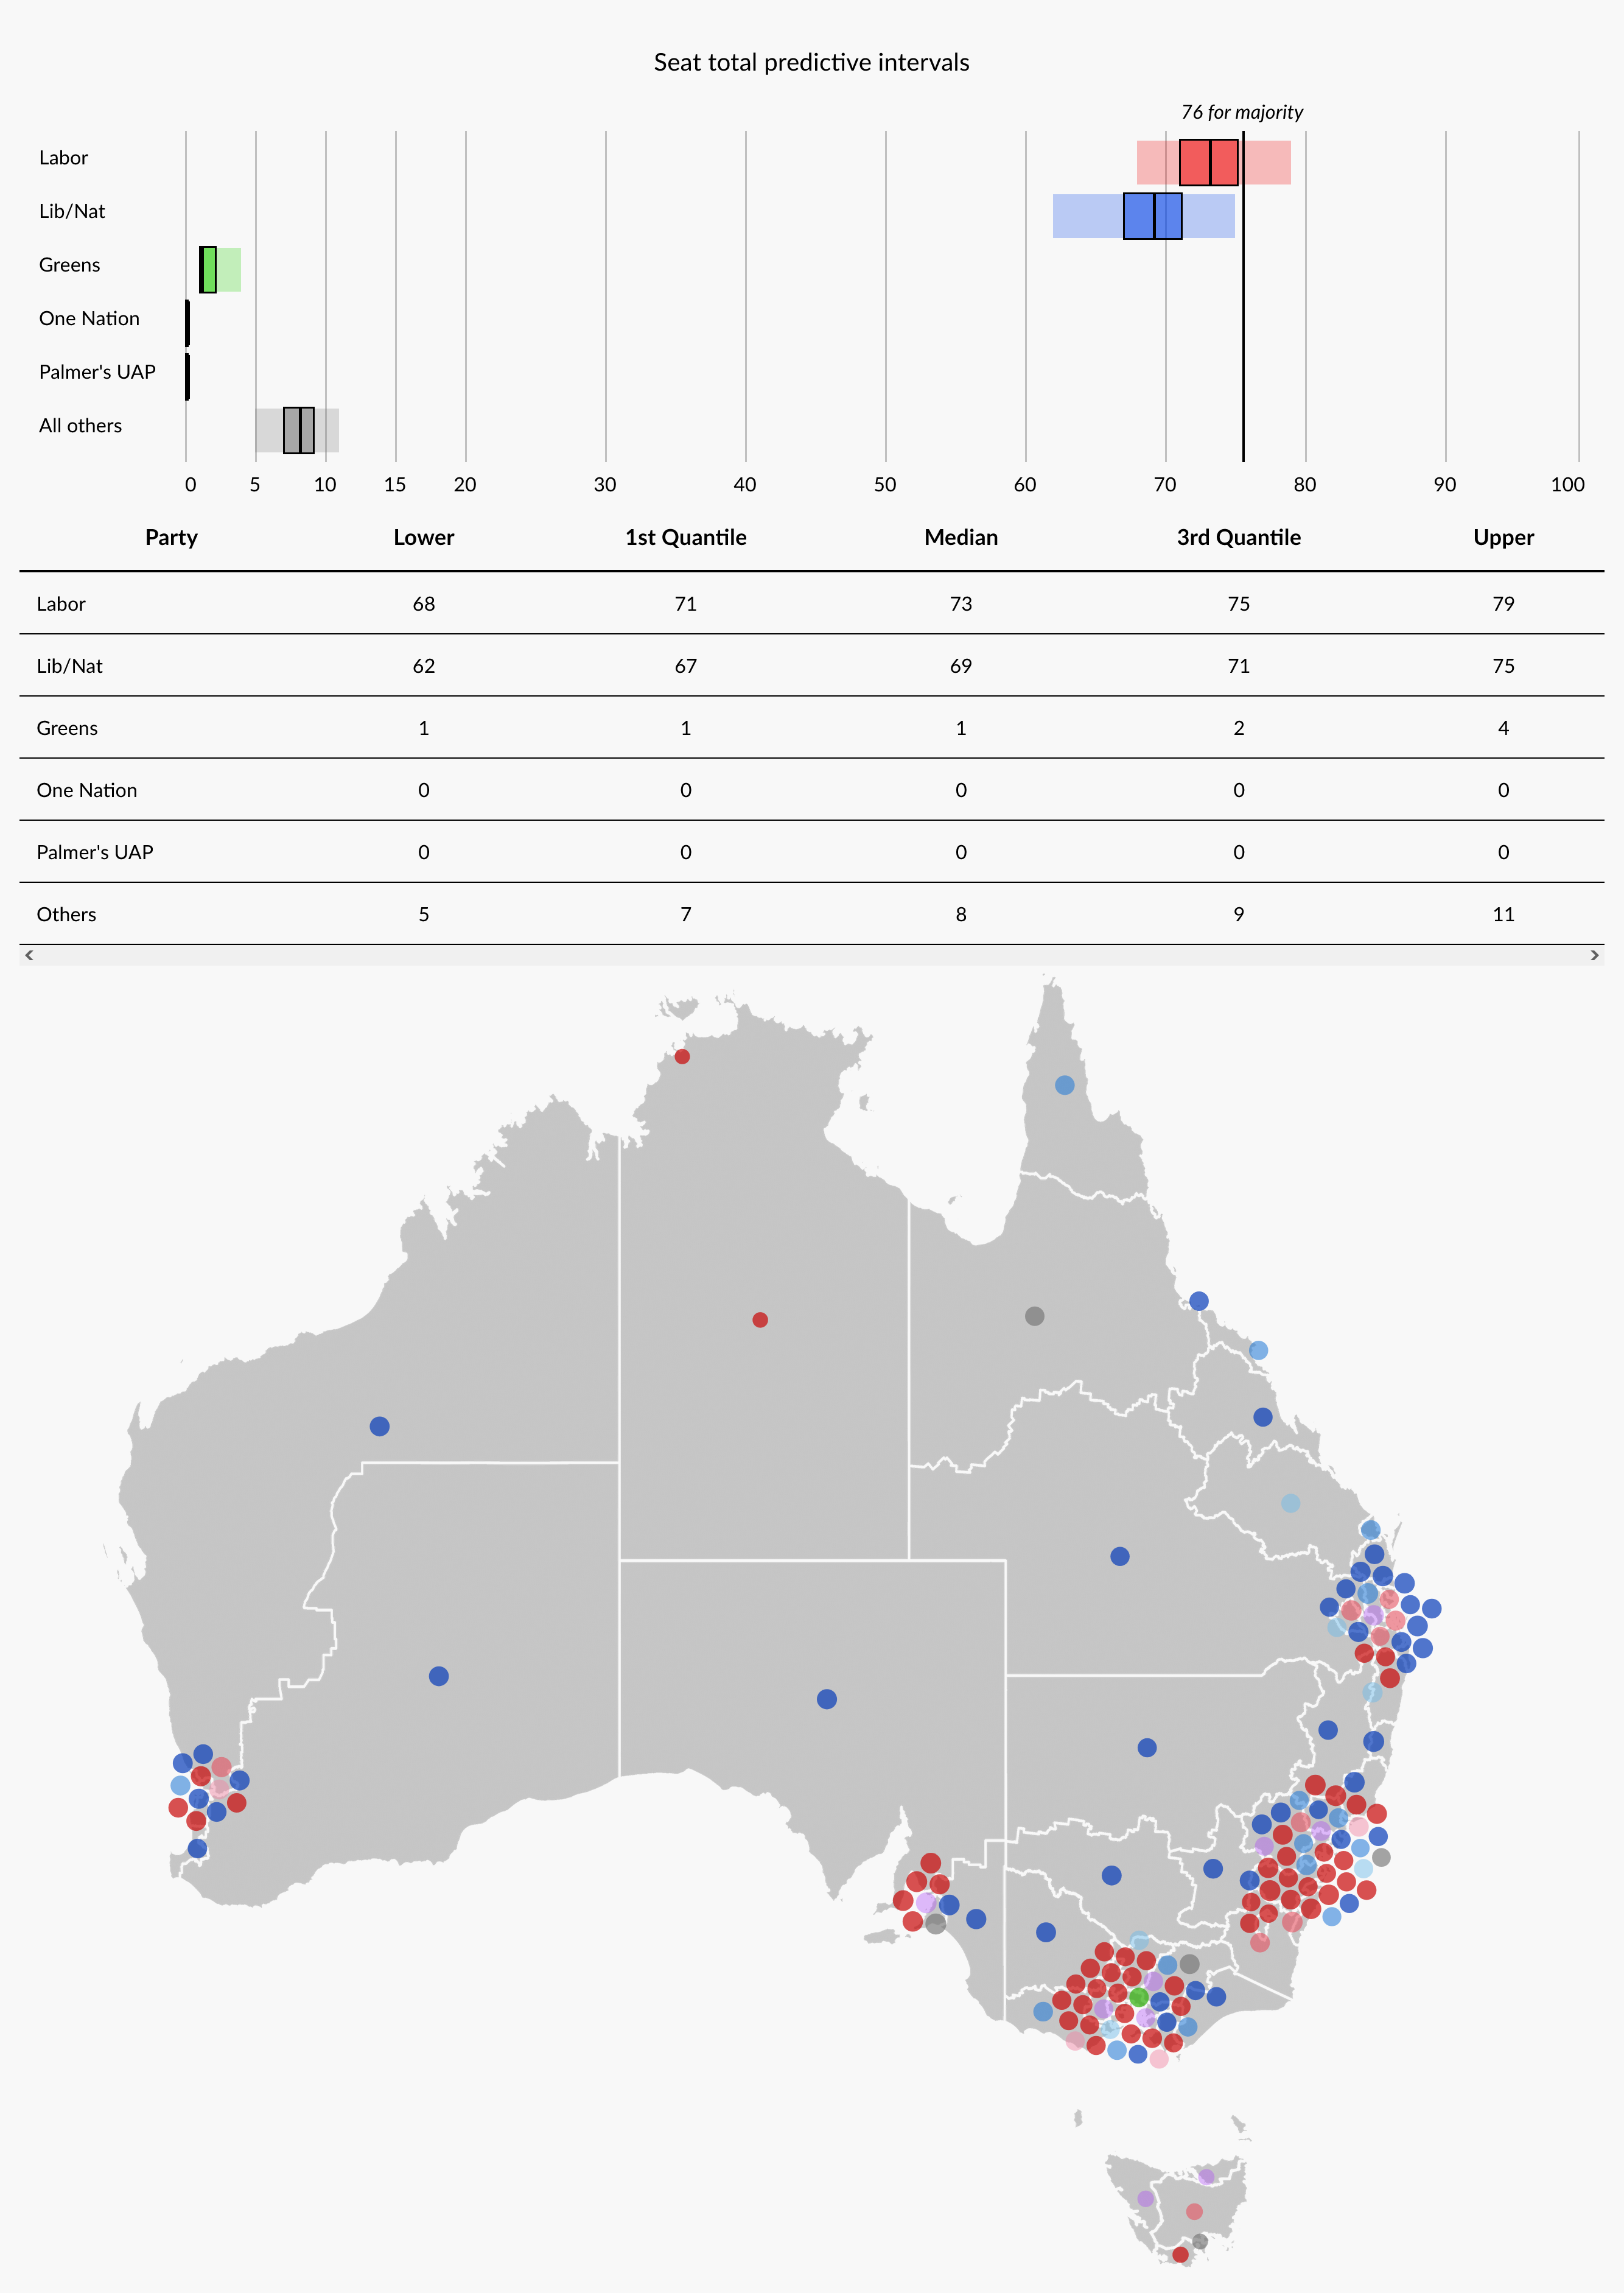 Simulated electoral map if Labor wins 51 on 2pp basis and systematically underperforms in marginals